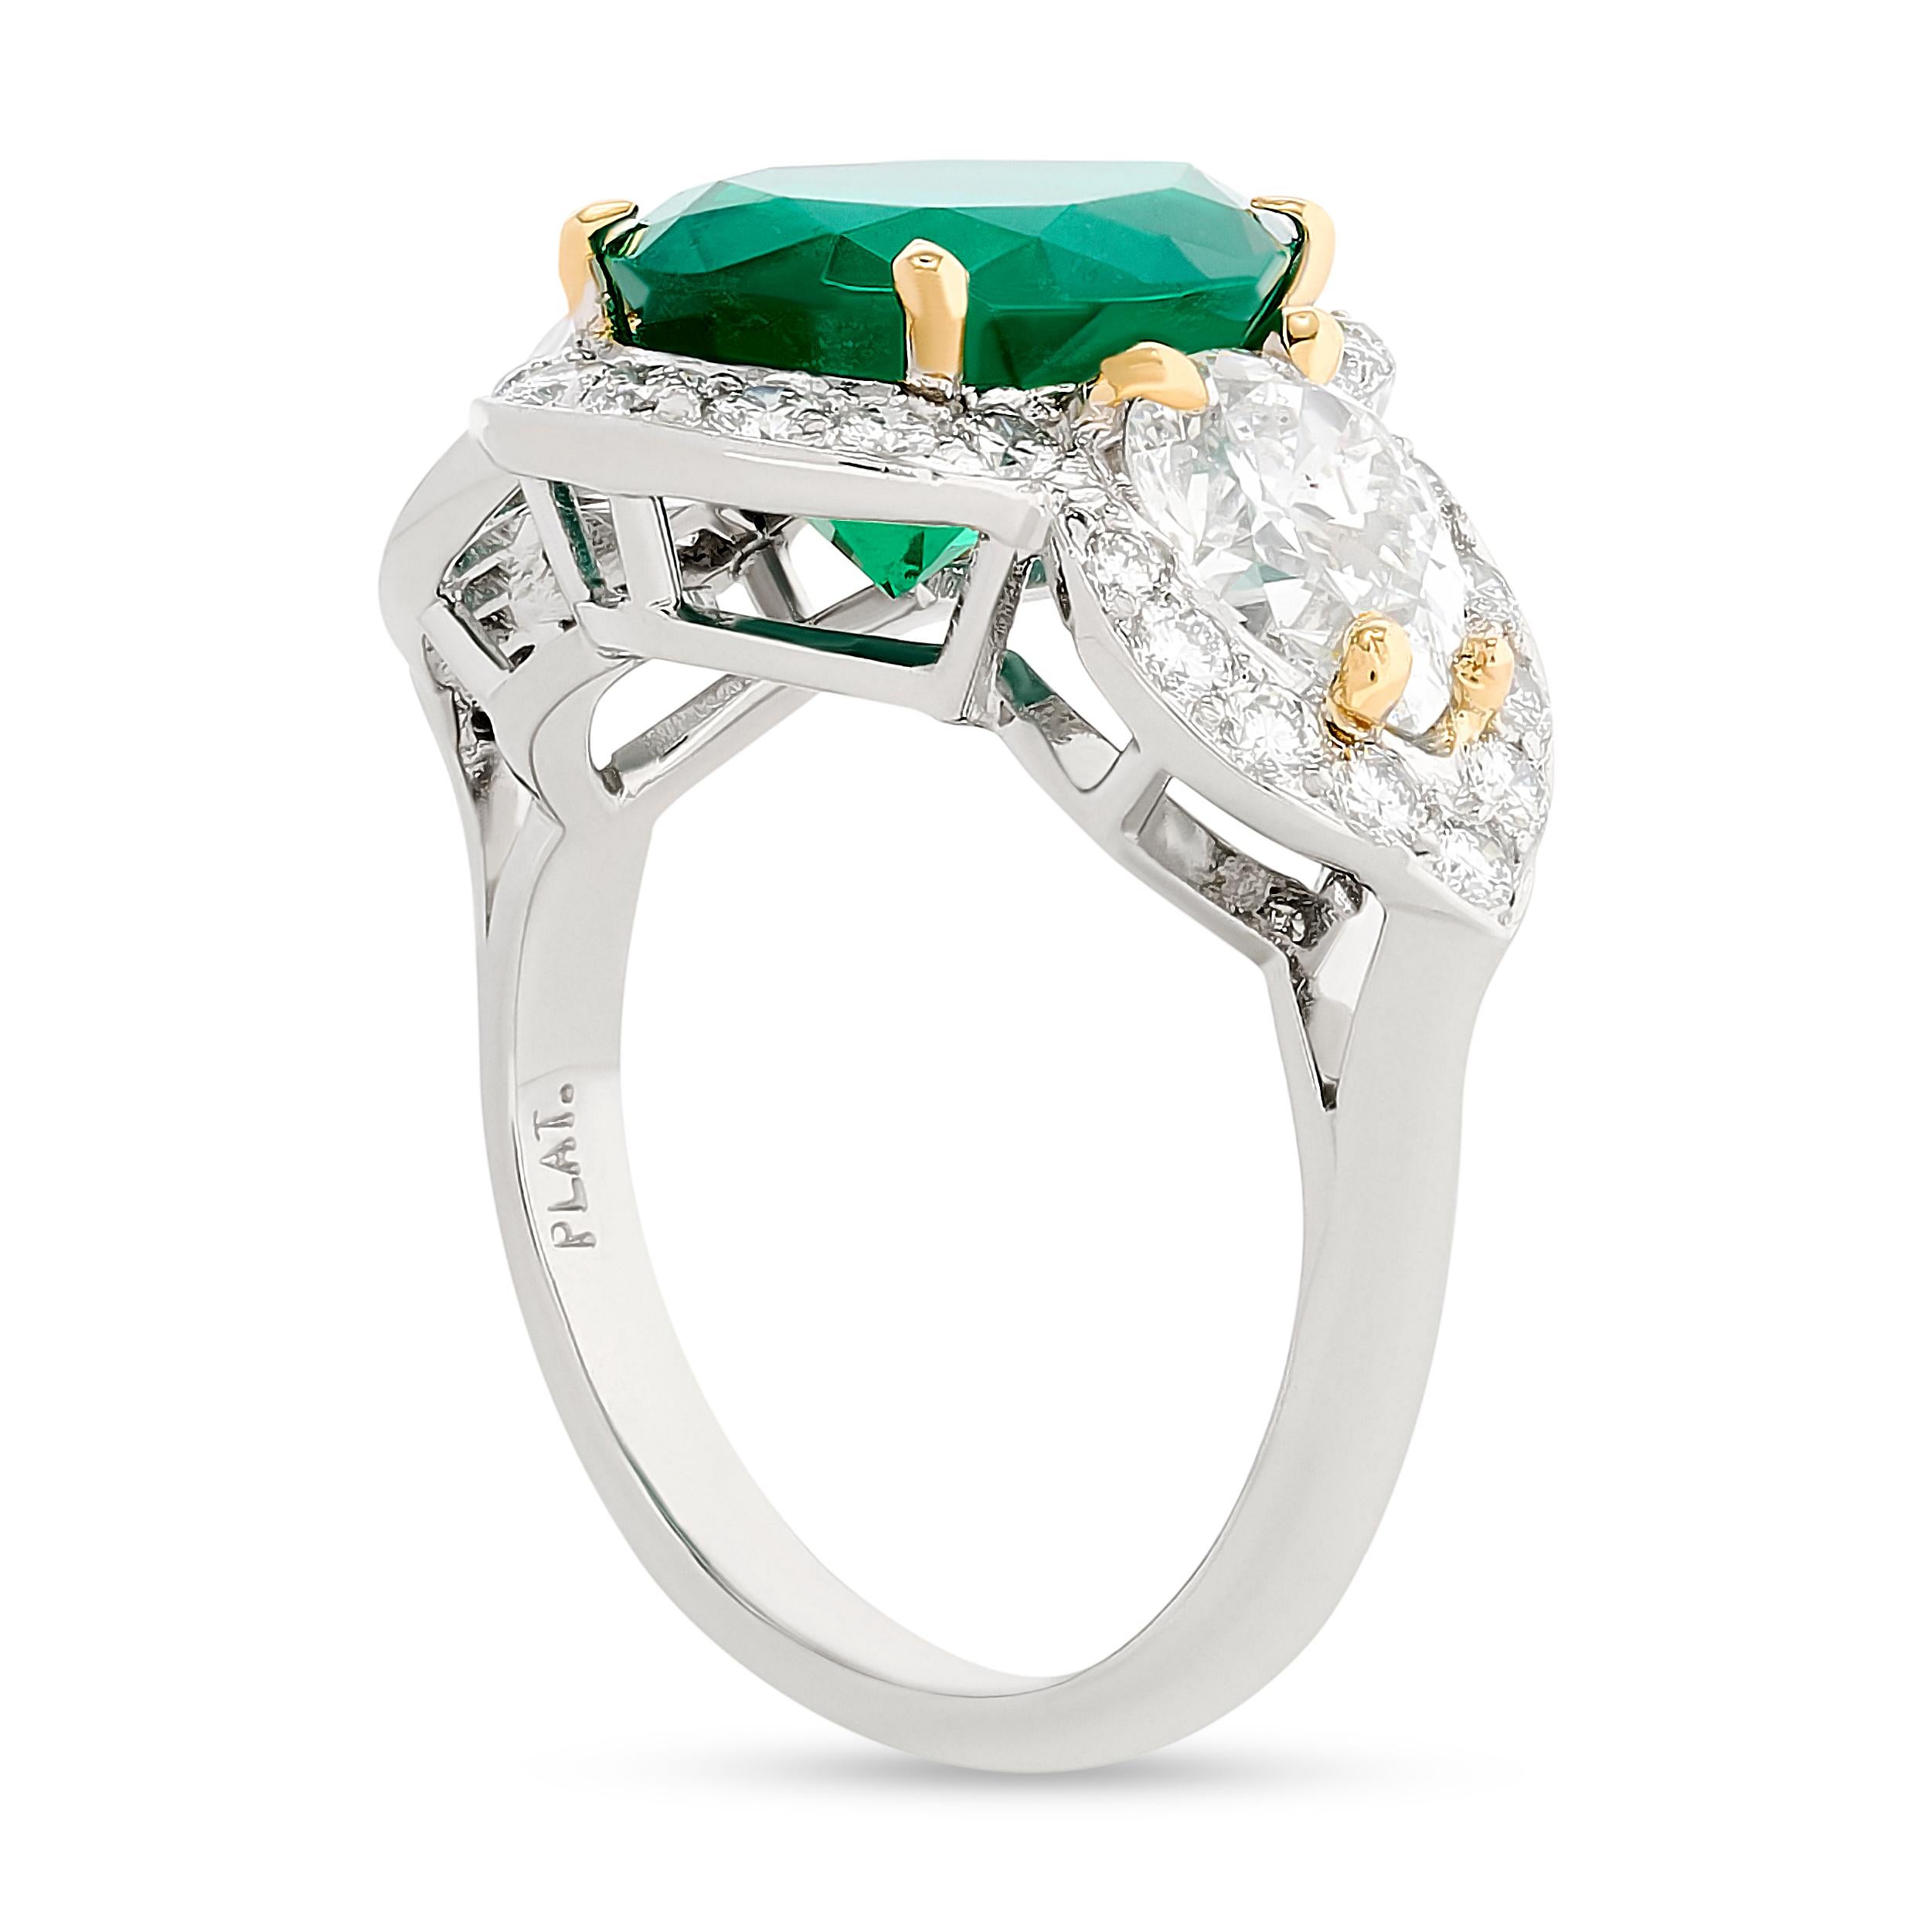 A pop of green to brighten your day. 

This Fred Leighton ring has a gorgeous green emerald that weighs approximately 3.81 carat; accompanied with a GIA Colombia F1 certificate. There is a pear shape diamond on either side, total they weigh